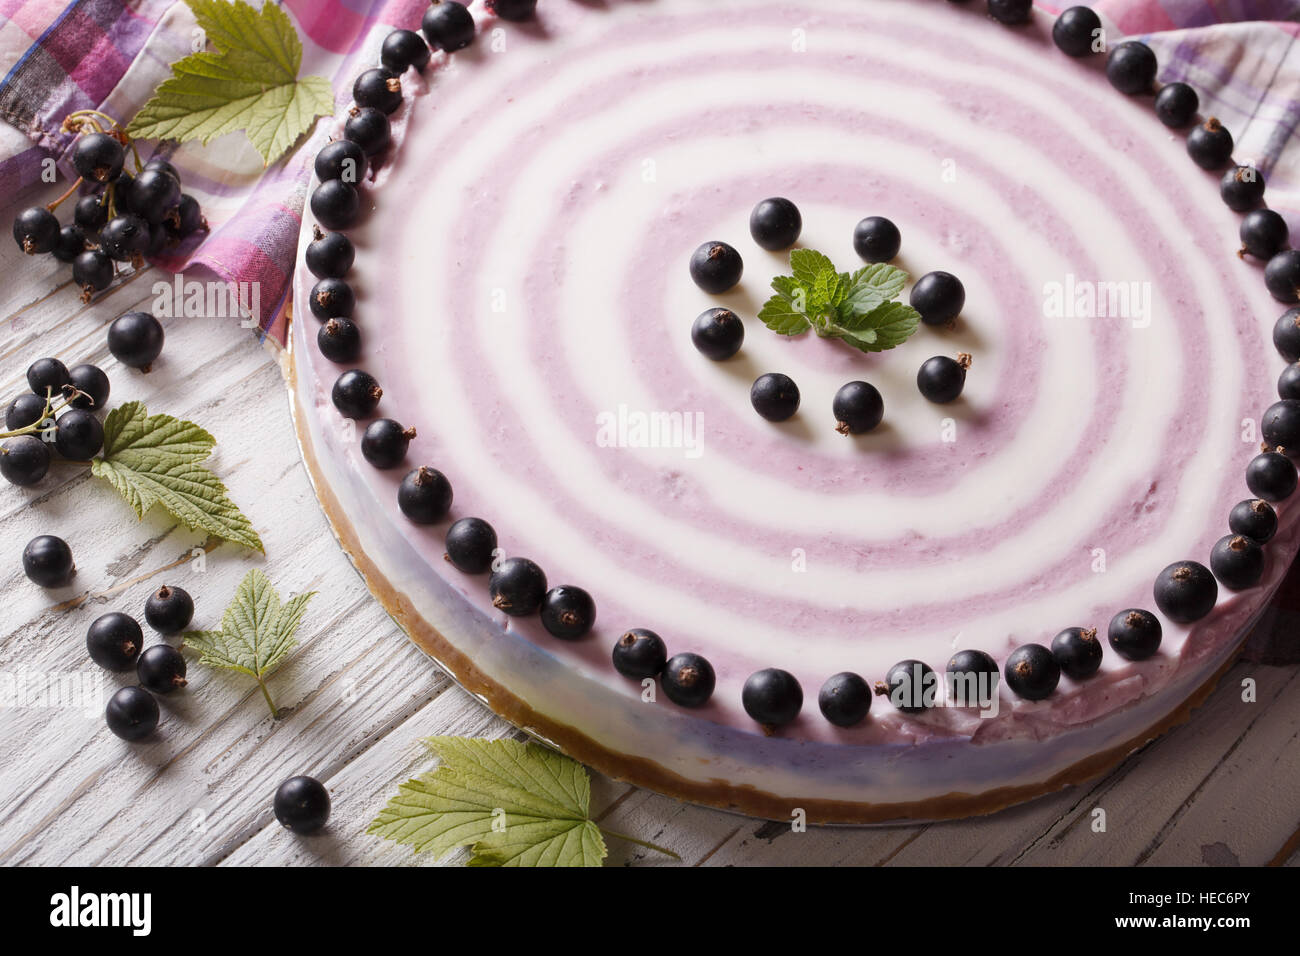 Beautiful striped currant cheesecake close-up on a plate. horizontal Stock Photo